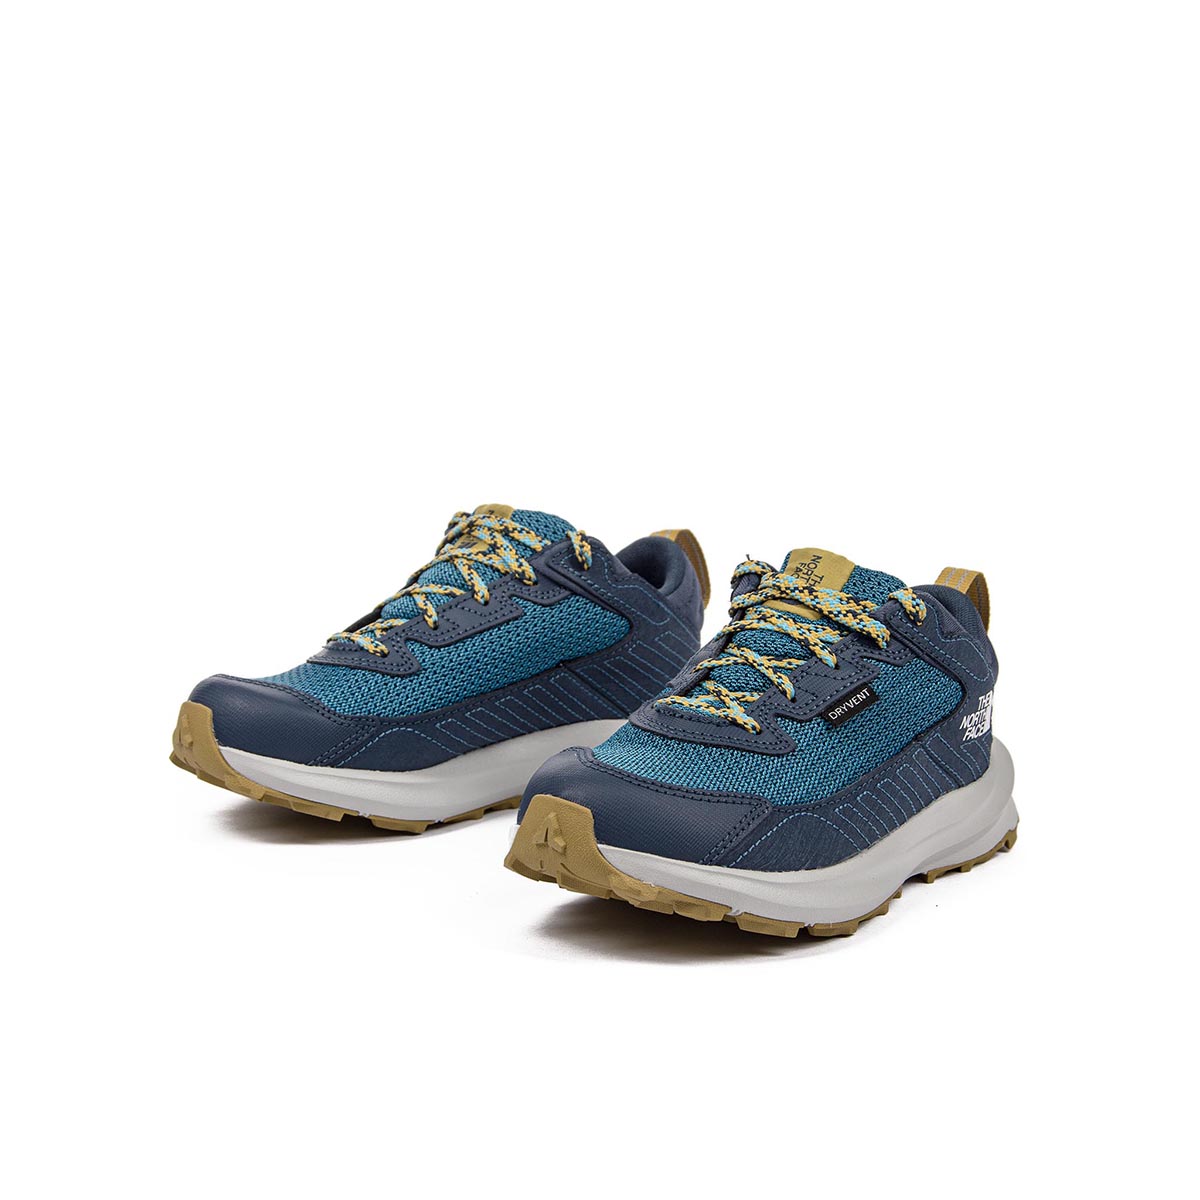 THE NORTH FACE - YOUTH FASTPACK WATERPROOF SHOES